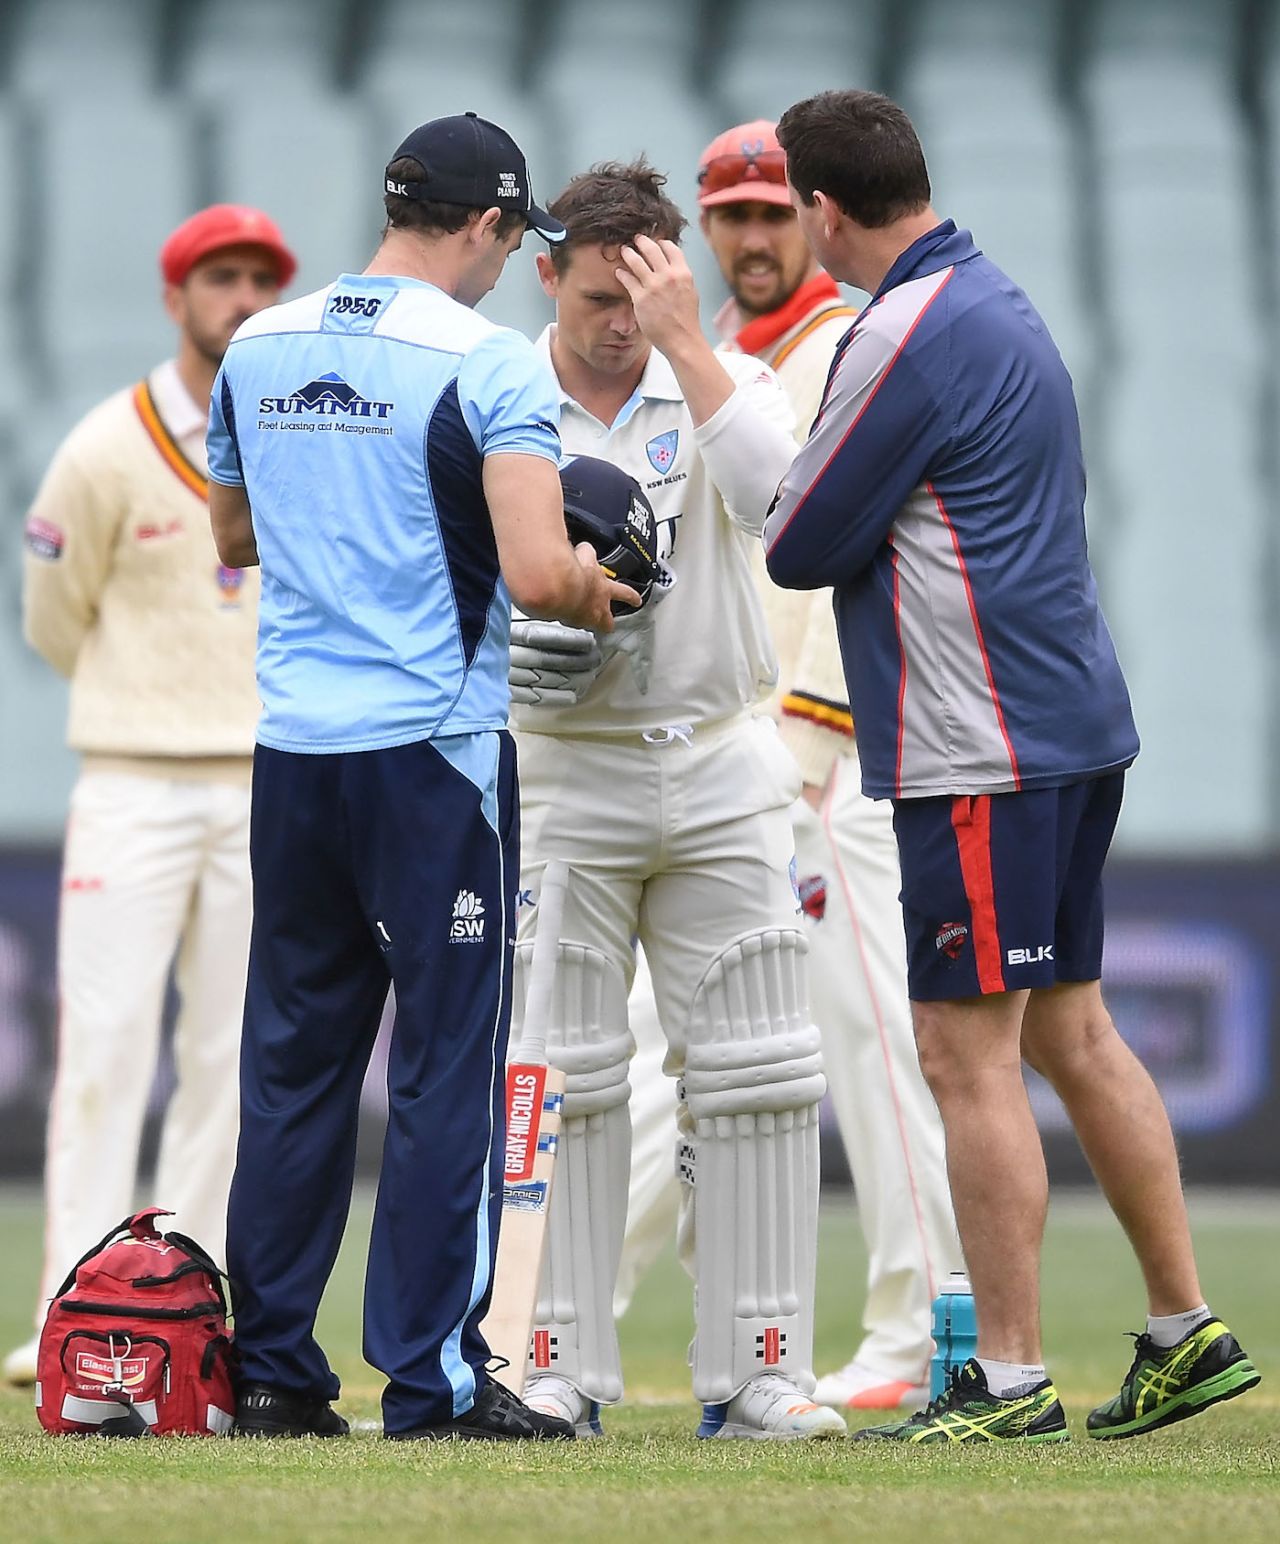 Steve O'Keefe gets checked after being struck on the helmet, South Australia v New South Wales, Sheffield Shield 2018-19, Adelaide, 2nd day, October 17, 2018